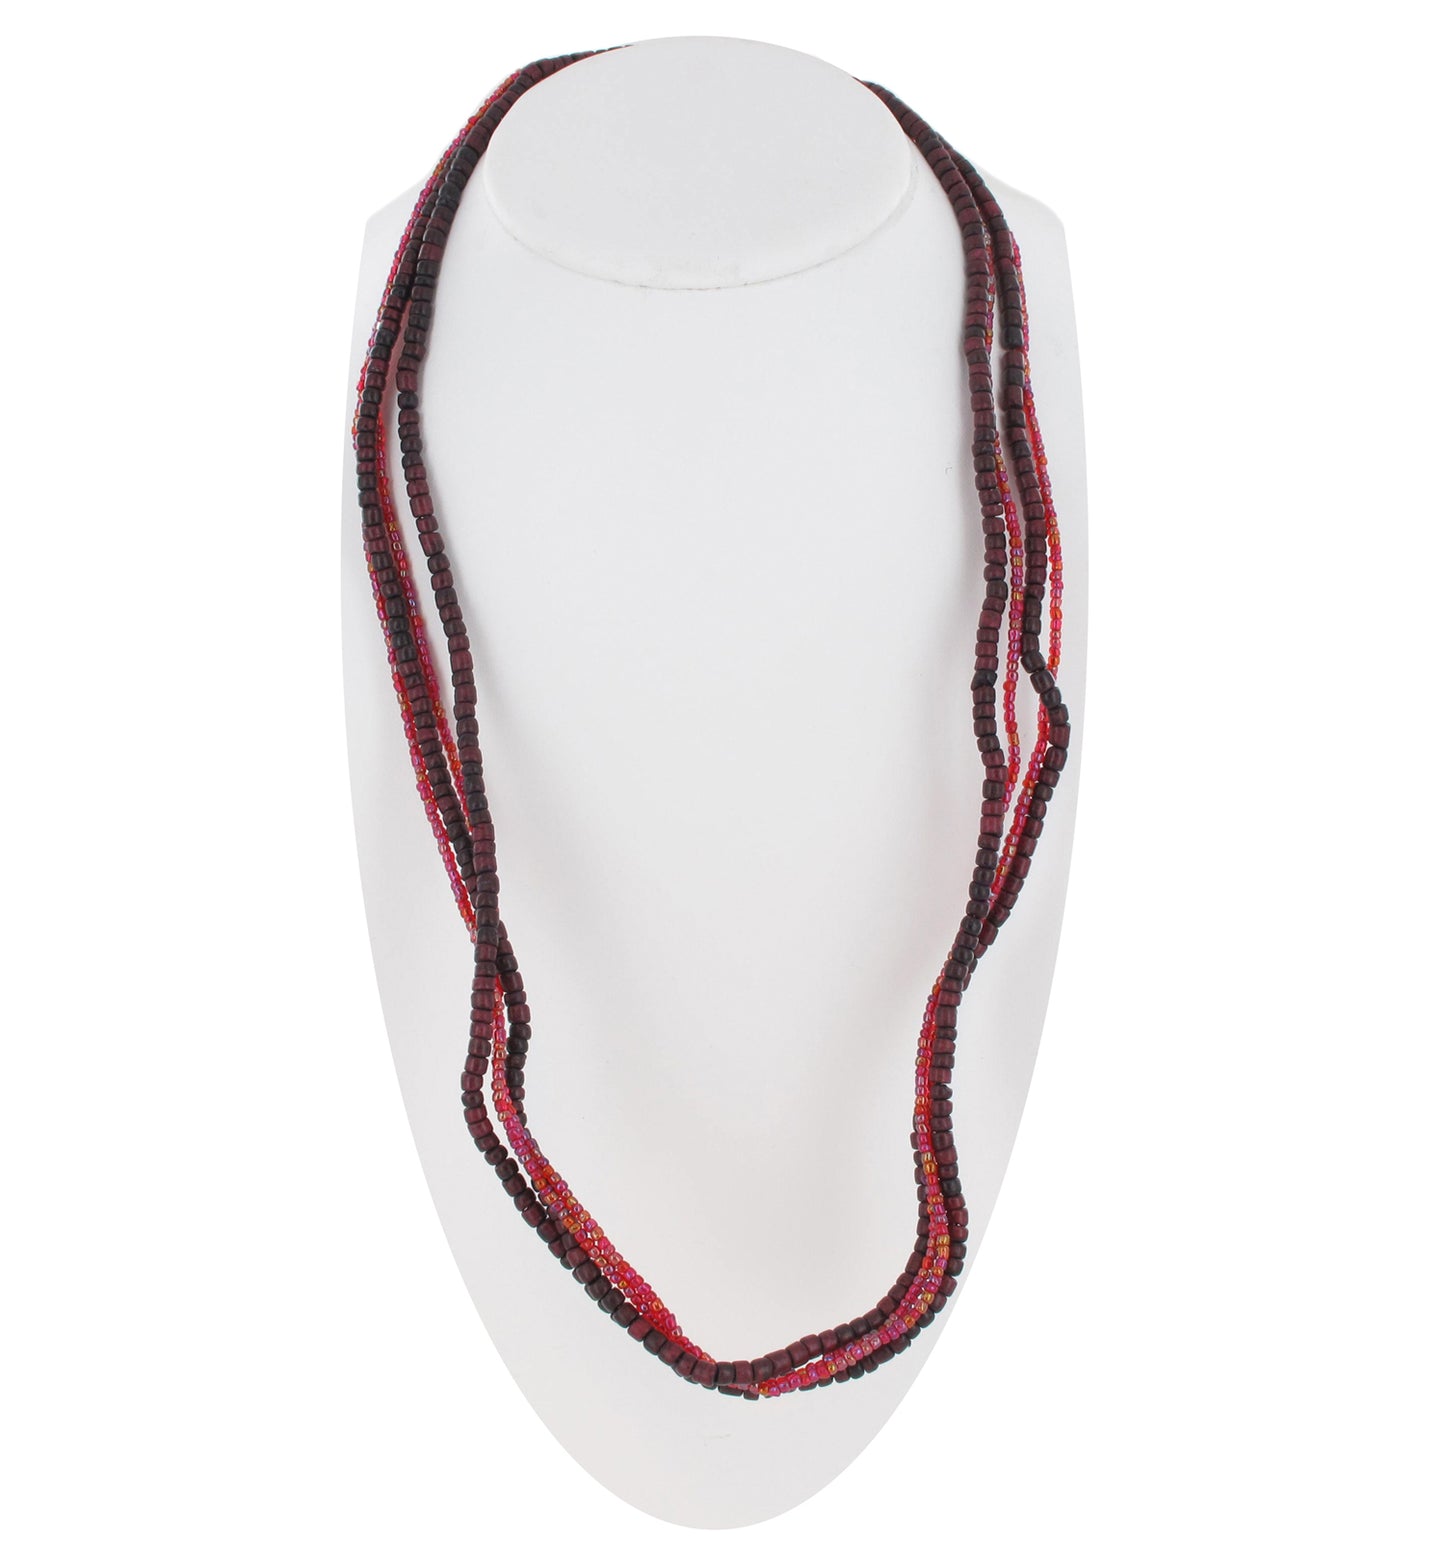 Crazy Wire Red Multicolor Beaded Wood Statement Multi Strand Necklace 40"